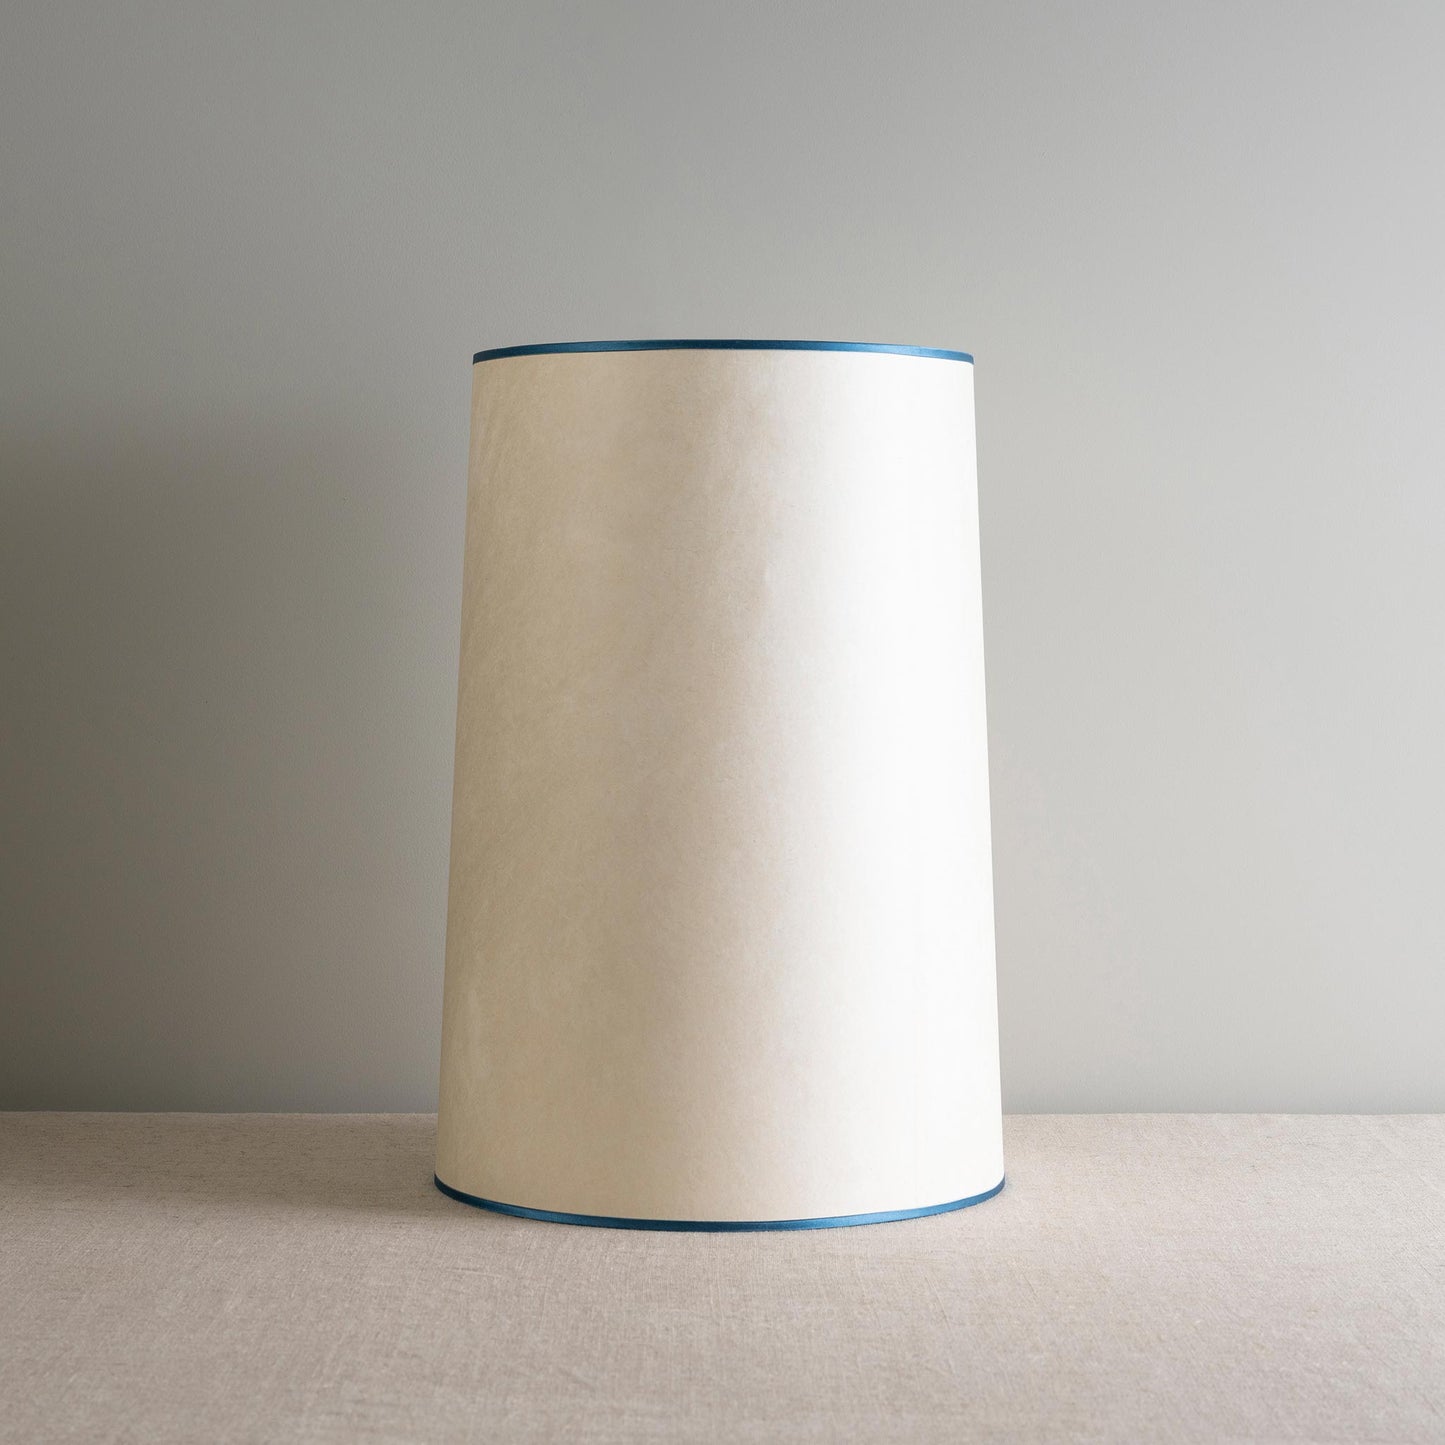 Whimsical Tall Straight Empire Lamp Shade in Soft White with Blue Trim